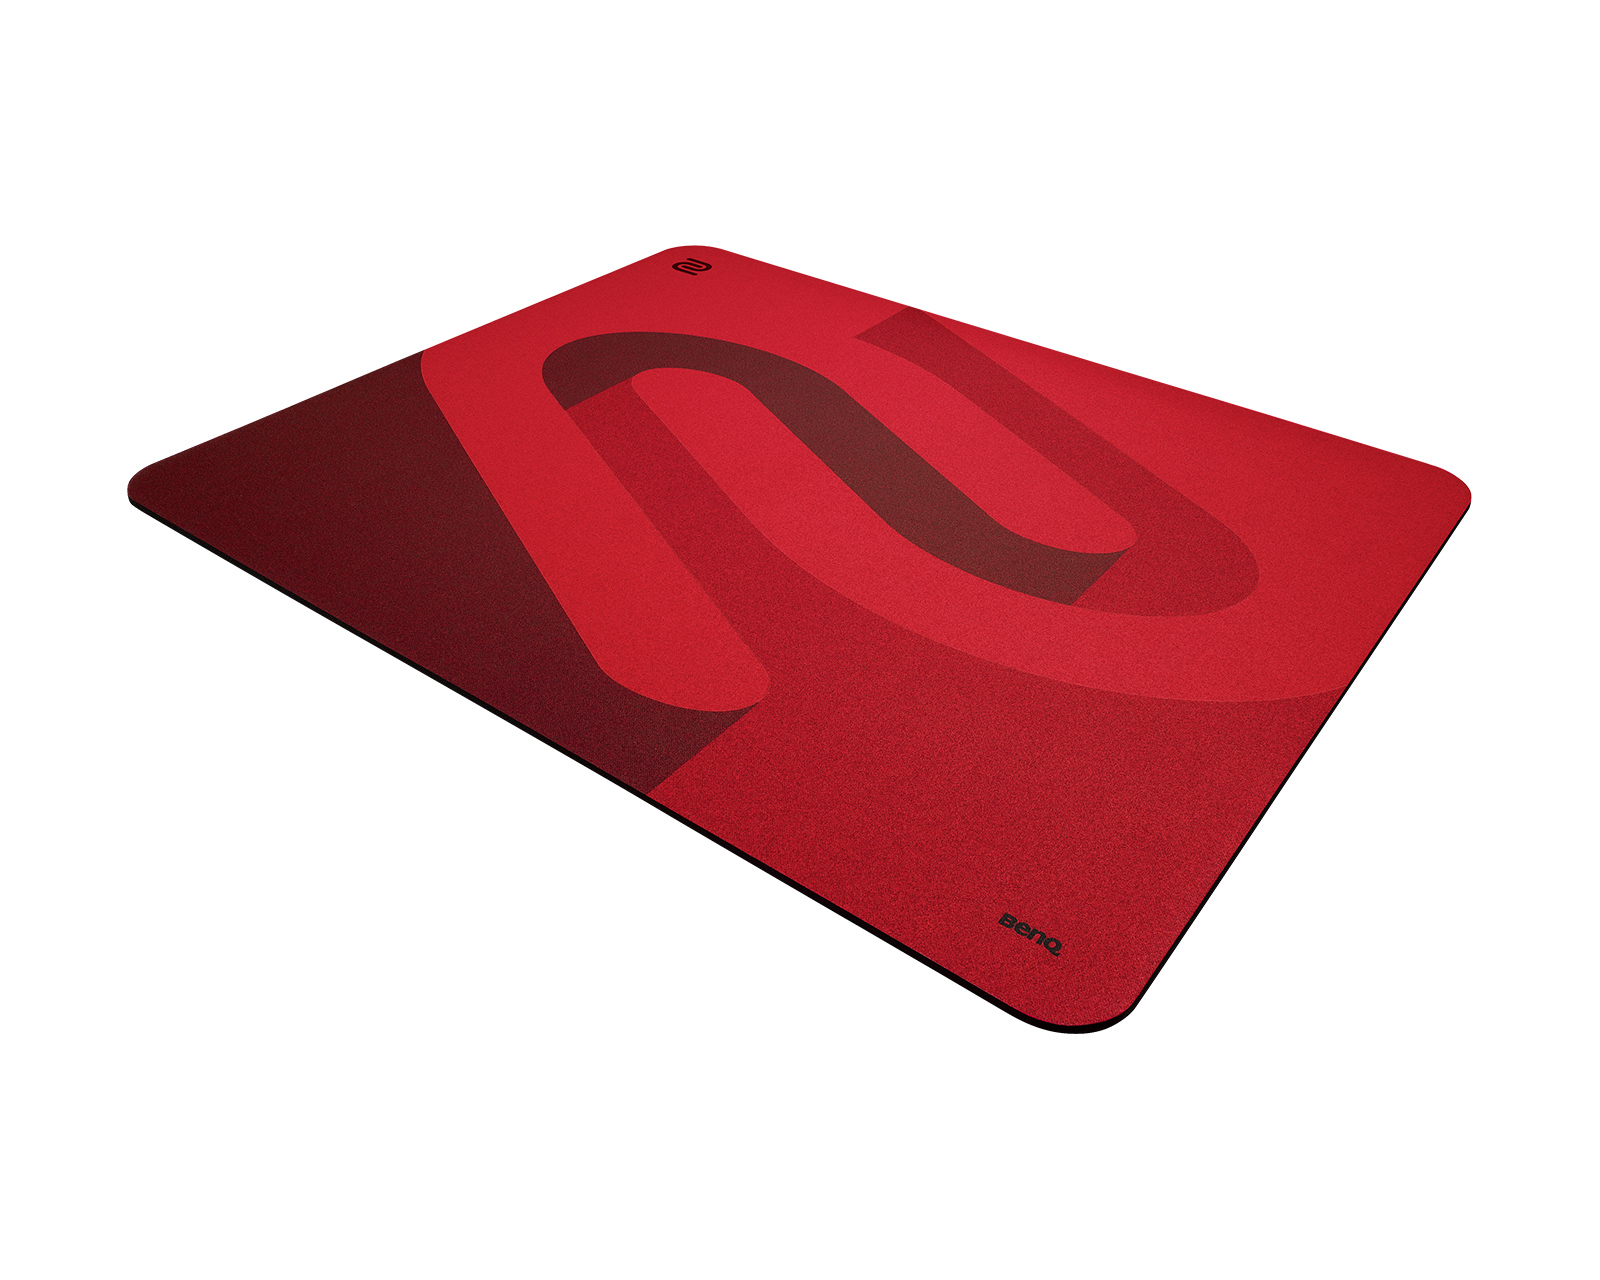 G-SR Large Gaming Mouse Pad for Esports Control